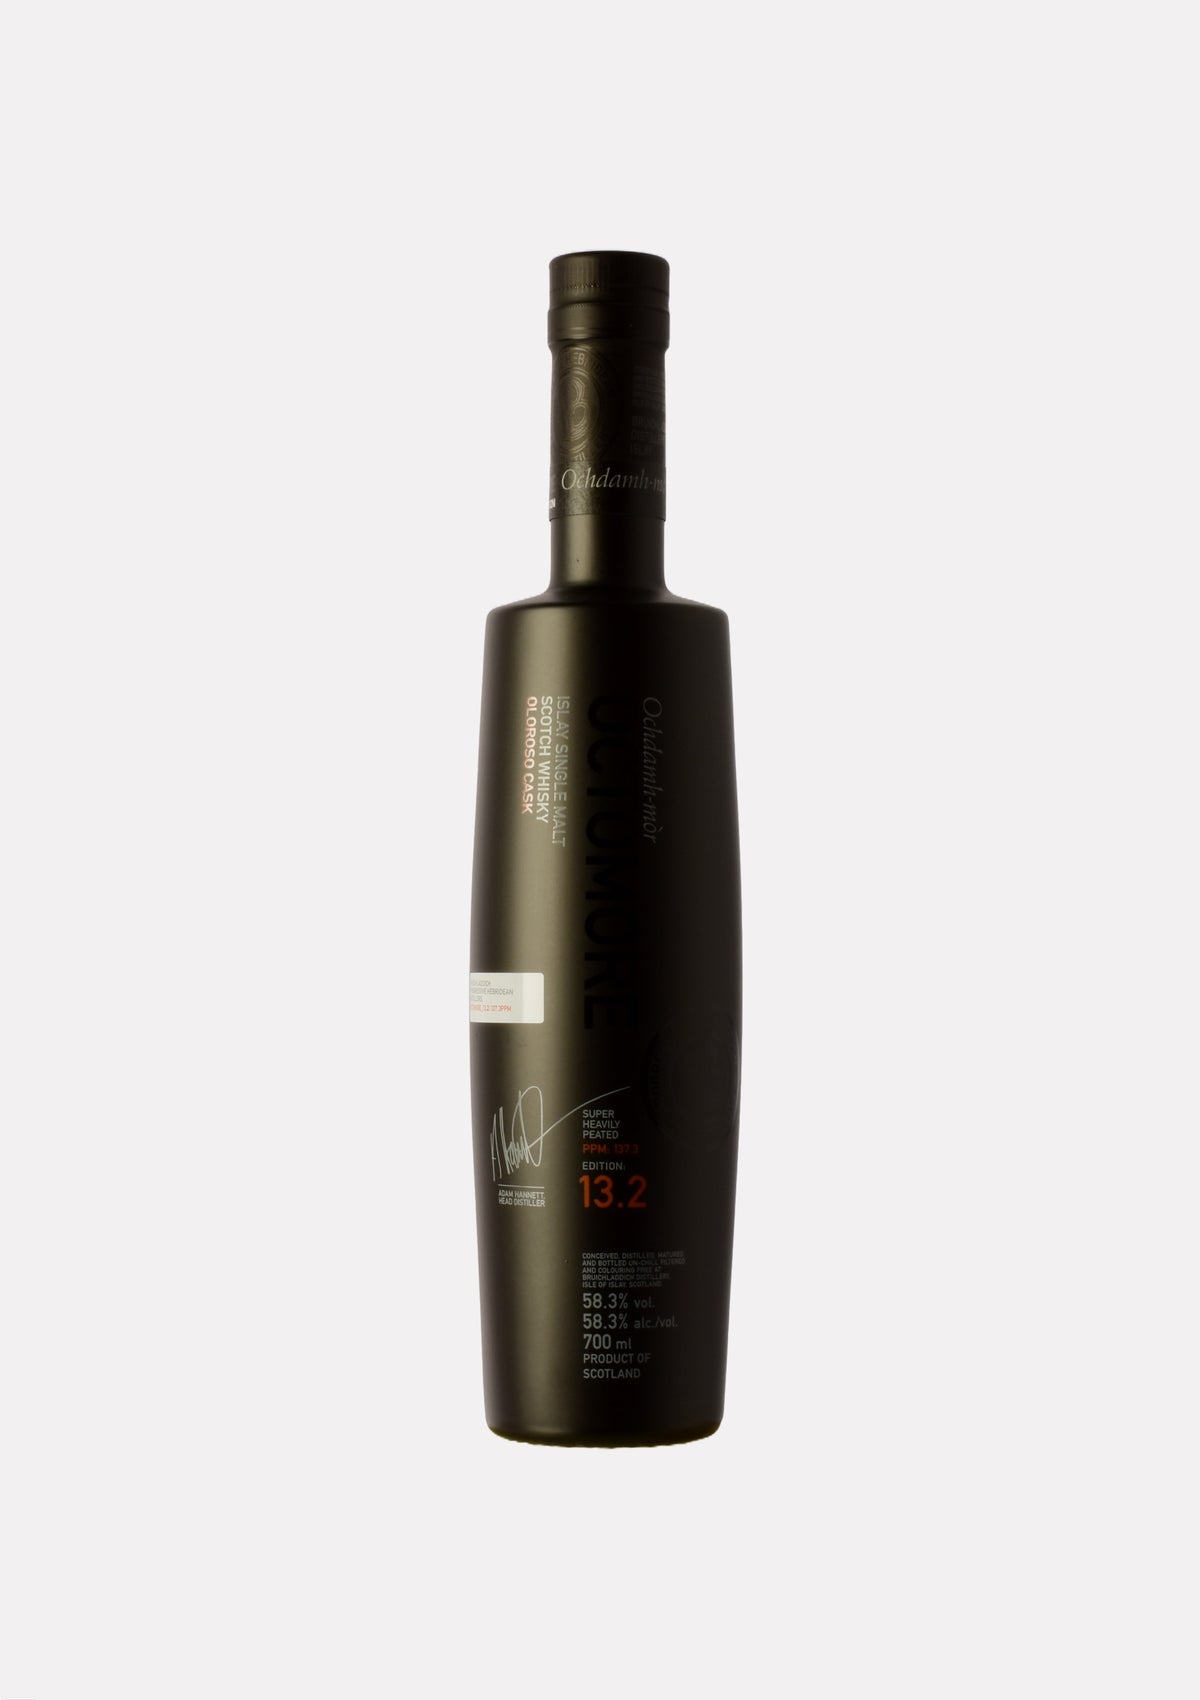 Octomore 13.2 137.3 ppm